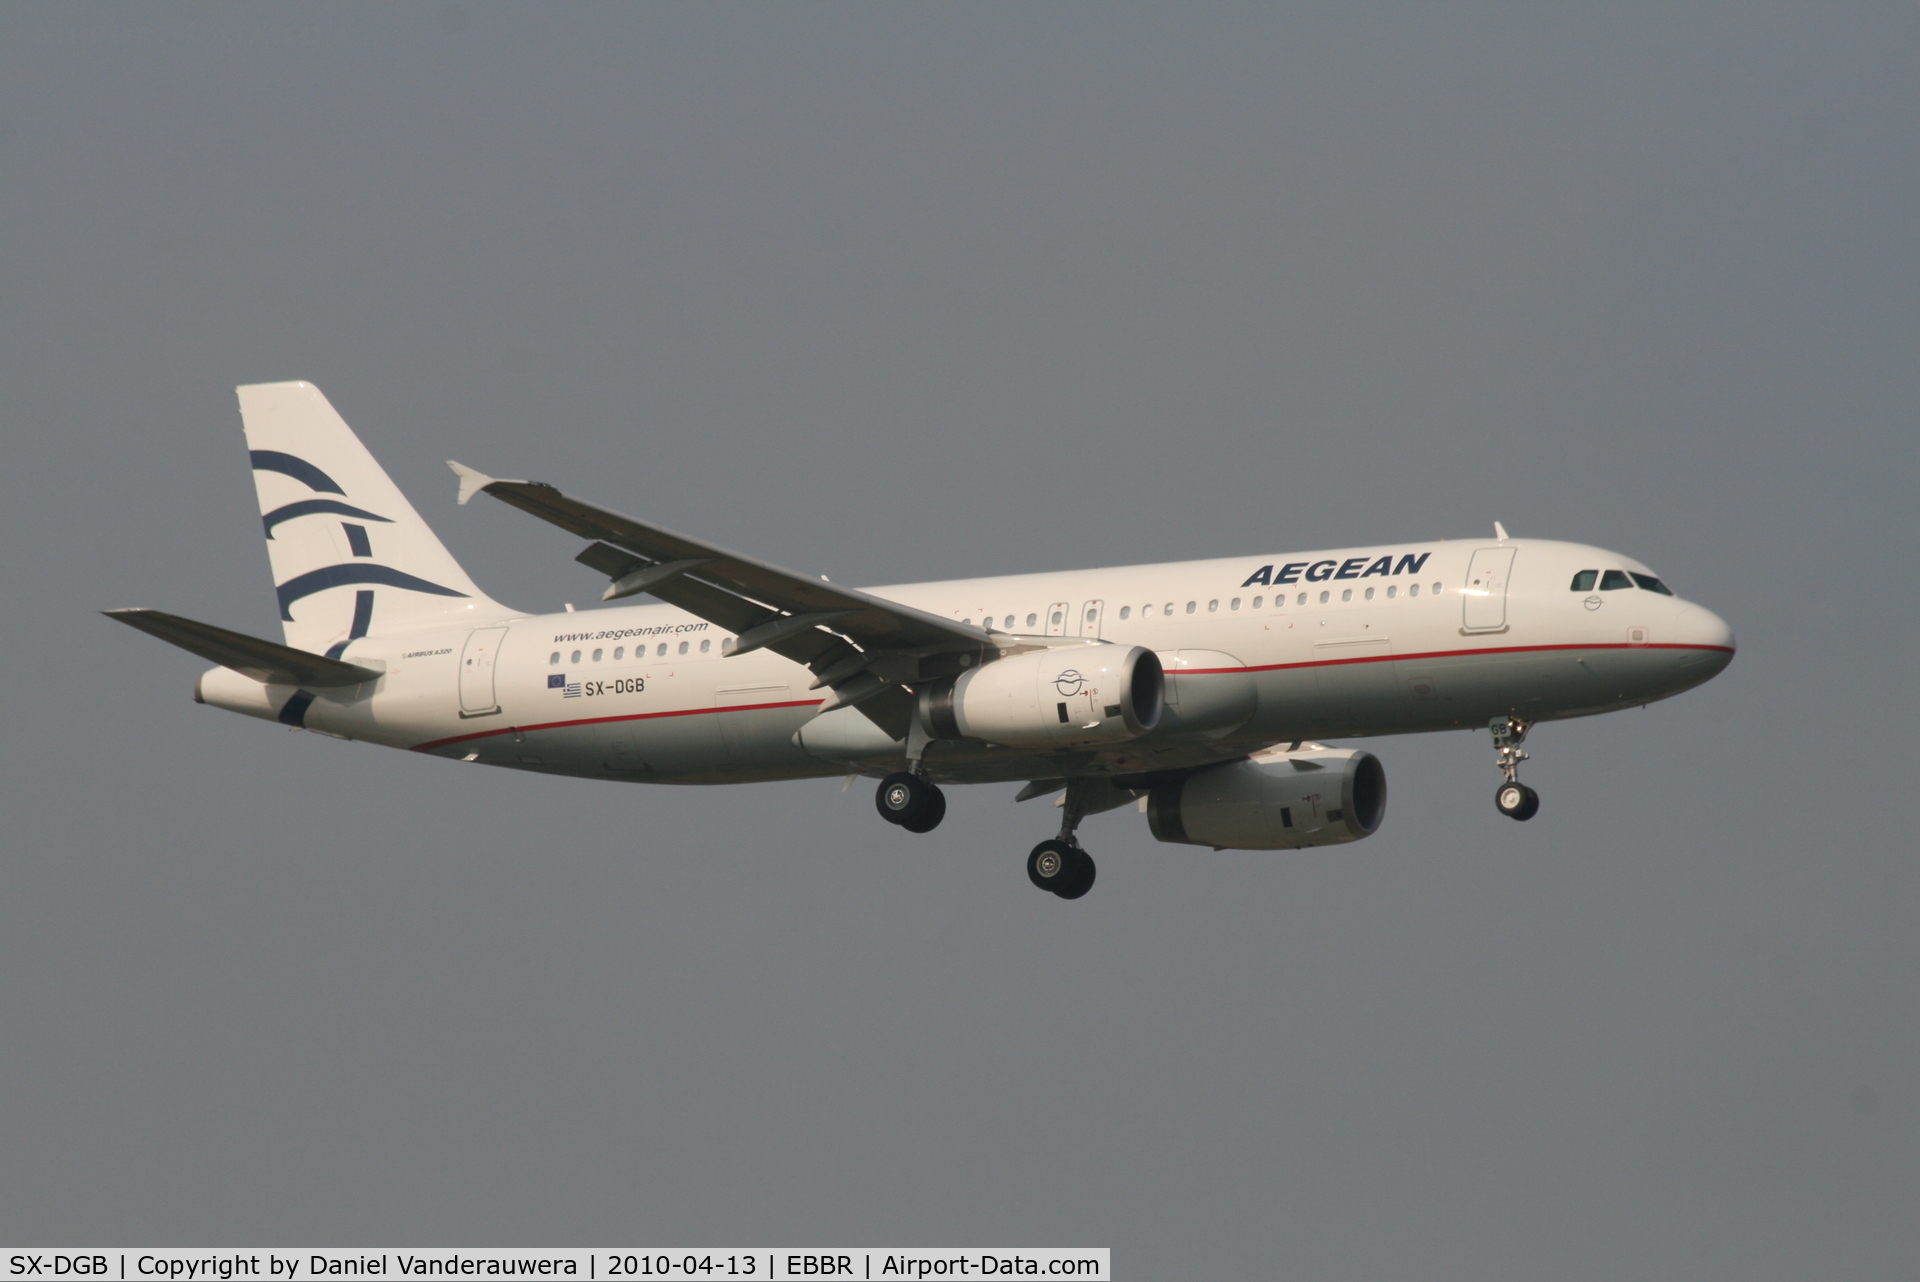 SX-DGB, 2009 Airbus A320-232 C/N 4165, Arrival of flight A3 620 to RWY 02